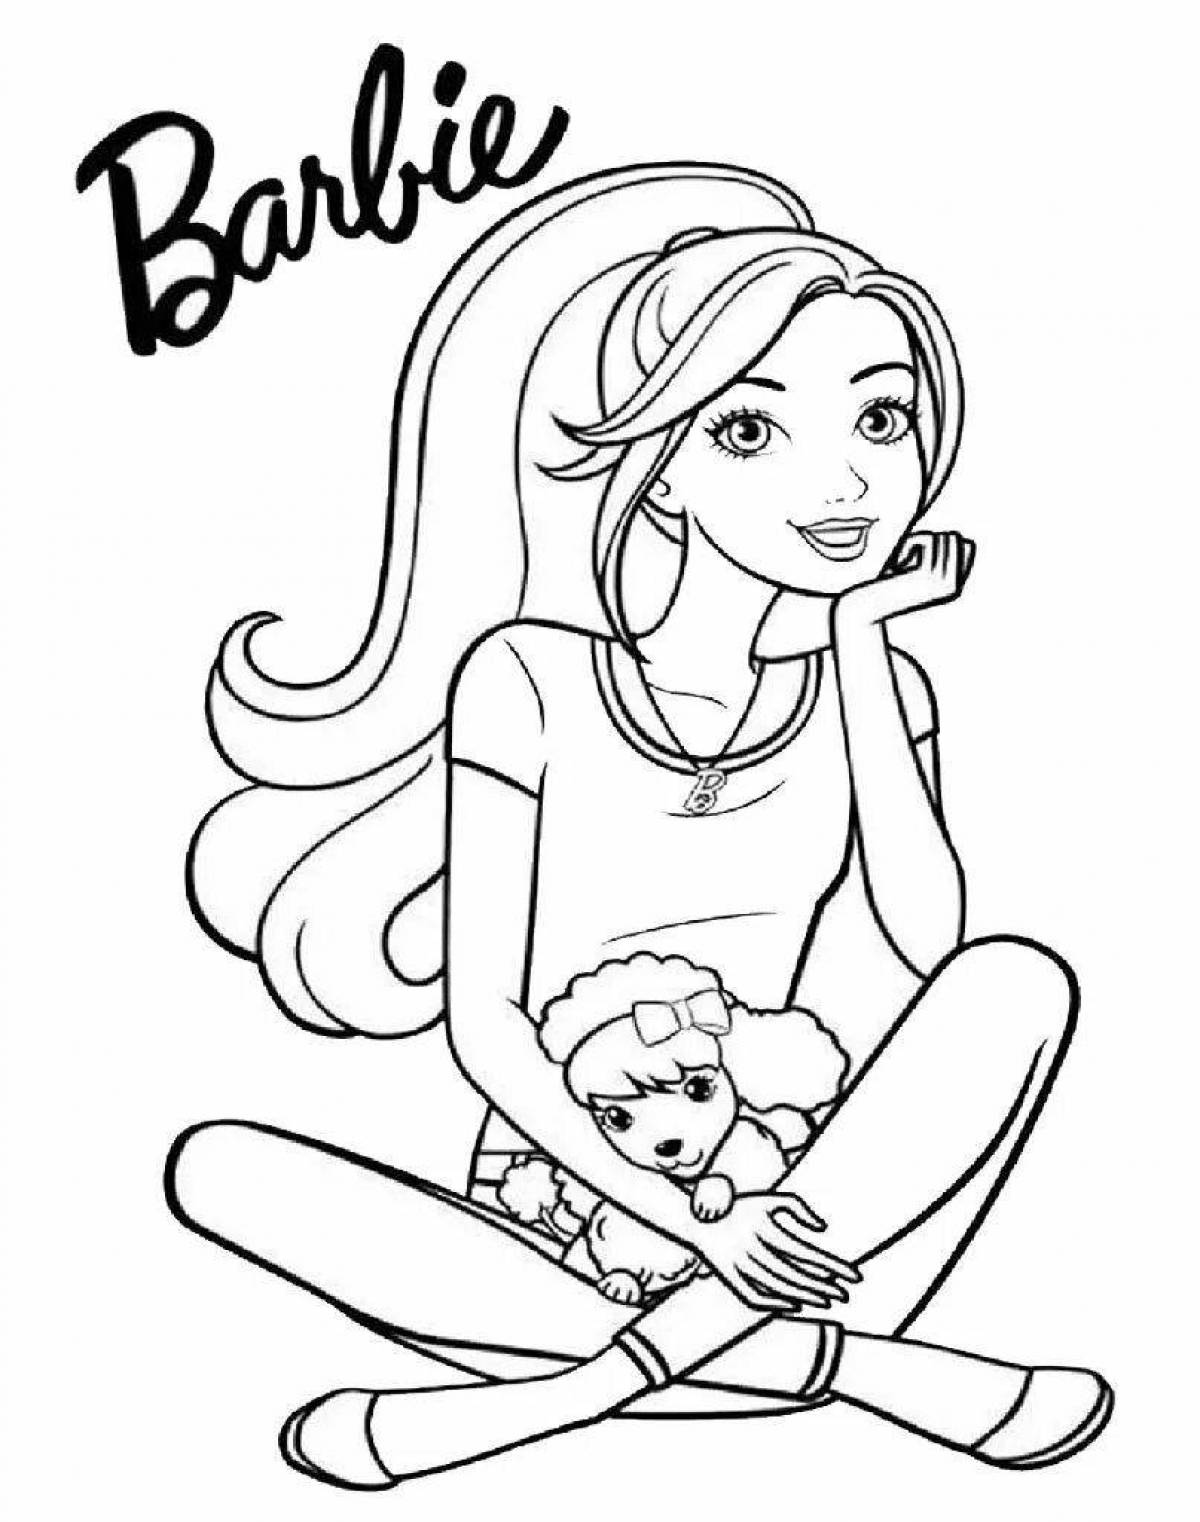 Colorful barbie family coloring book